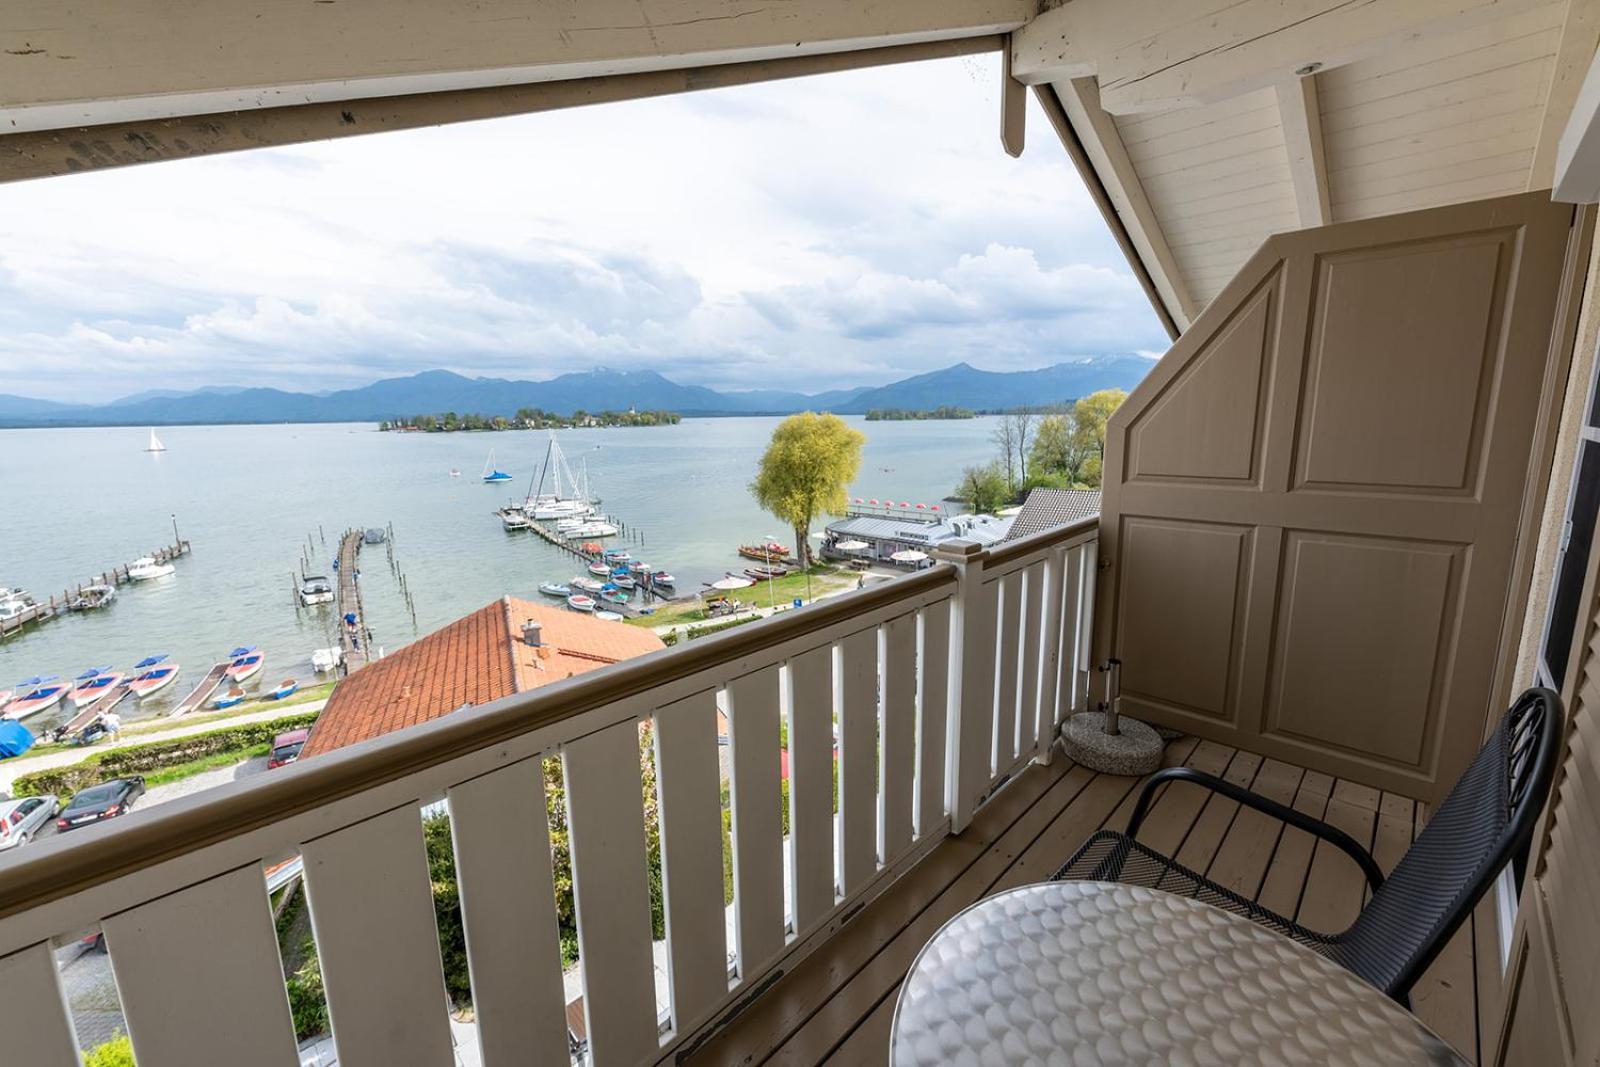 Chiemseestern Vacation & Recreation "Adults Only" Gstadt am Chiemsee Cameră foto